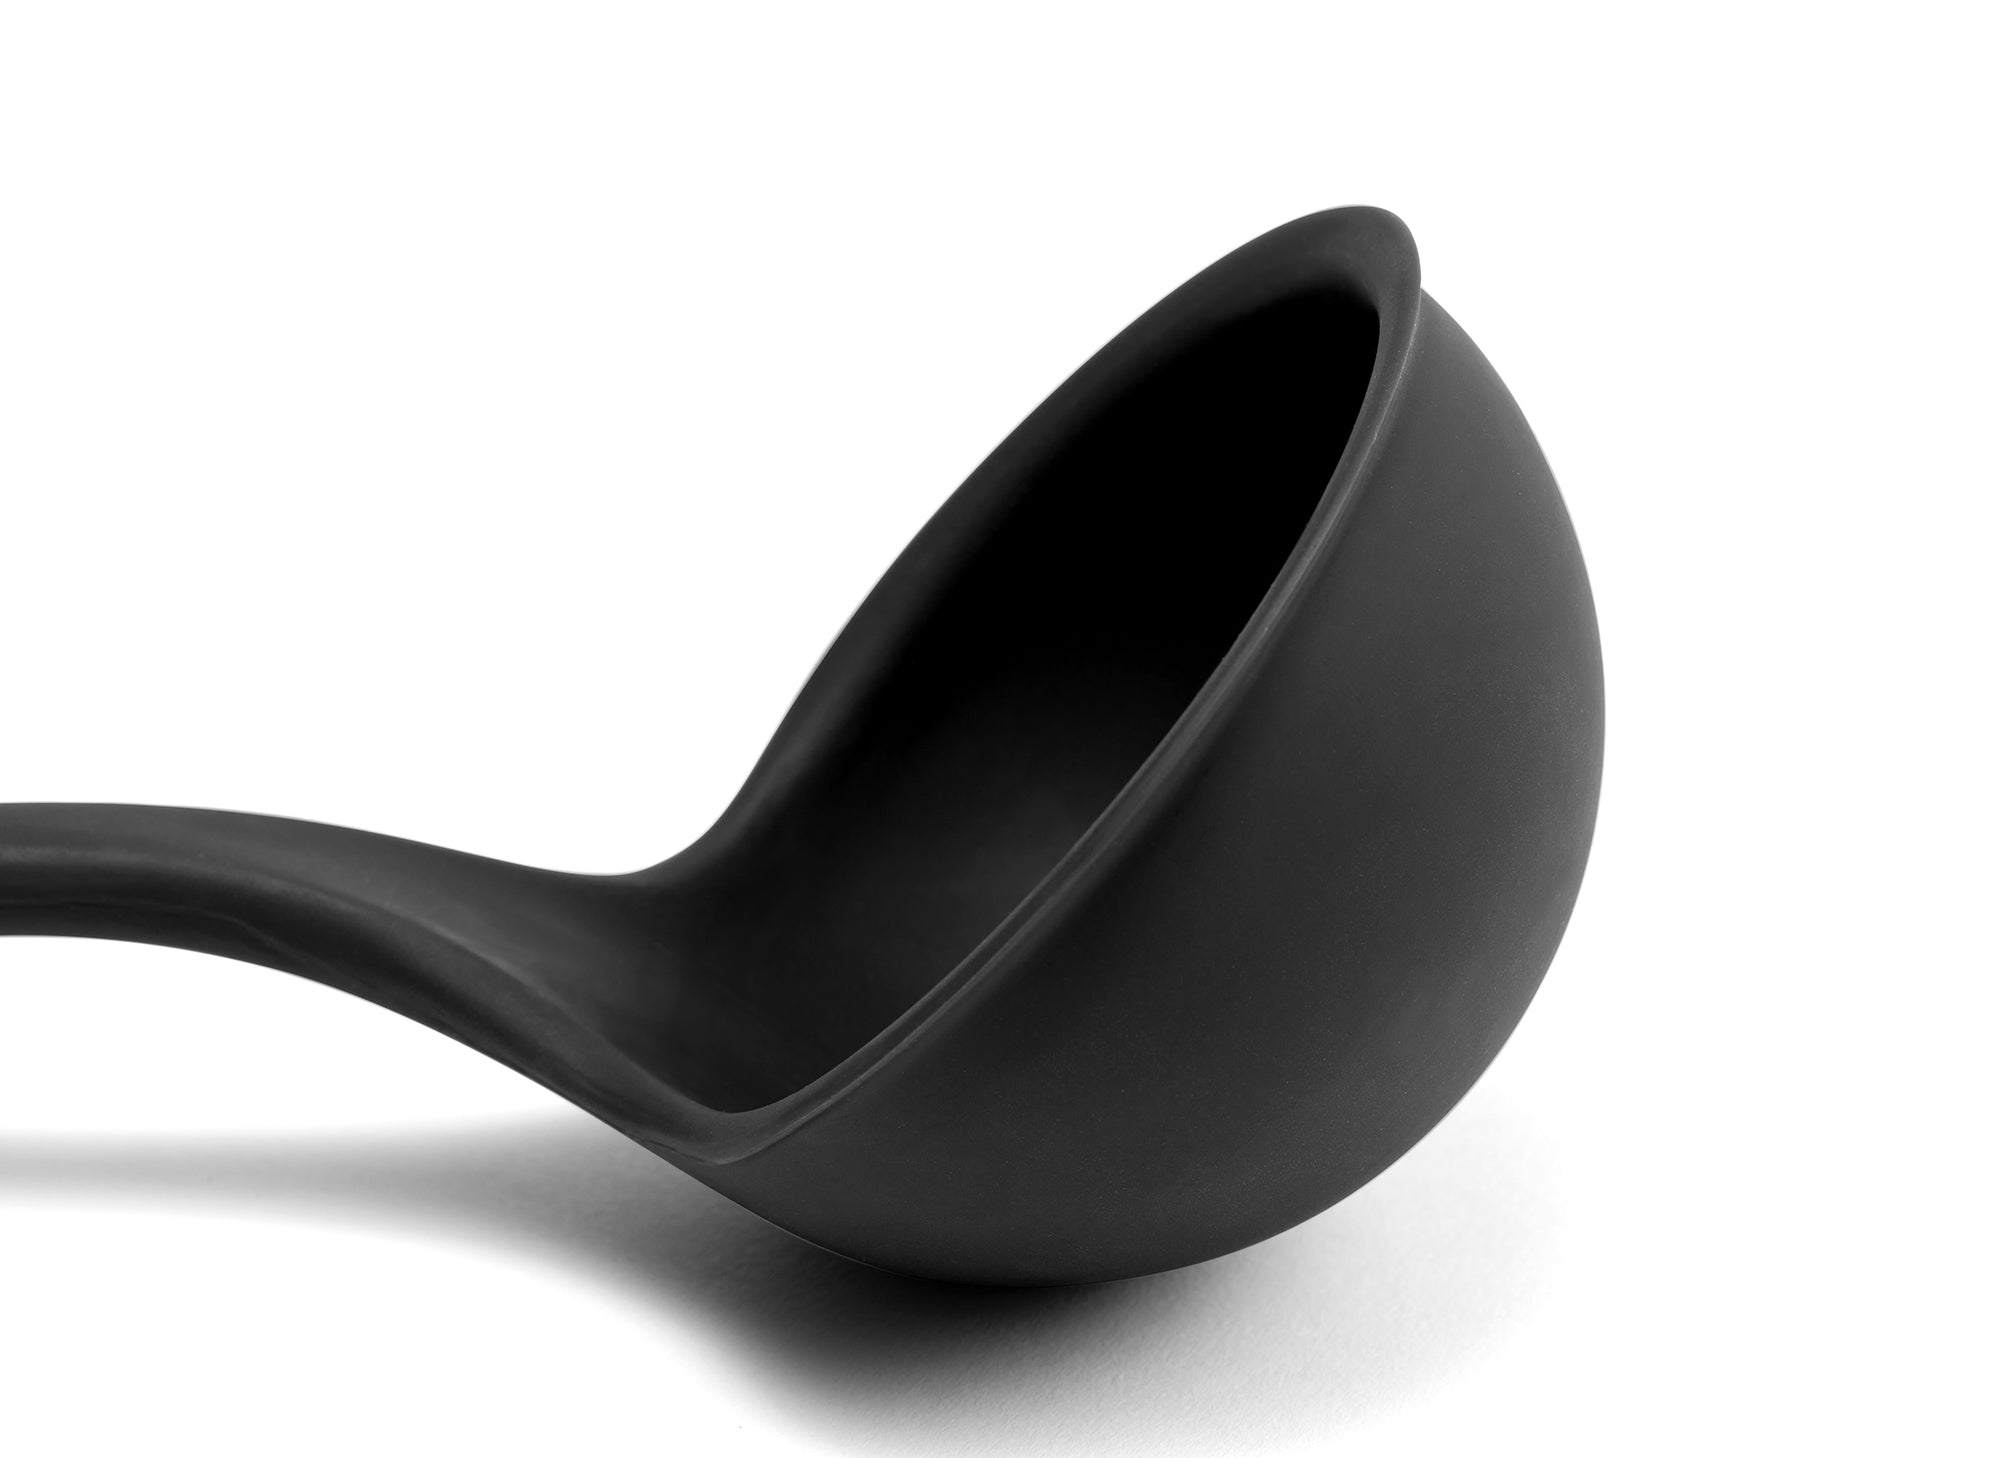 Close view of Black Misen Landle’s curved scoop head seen from the side to show depth.